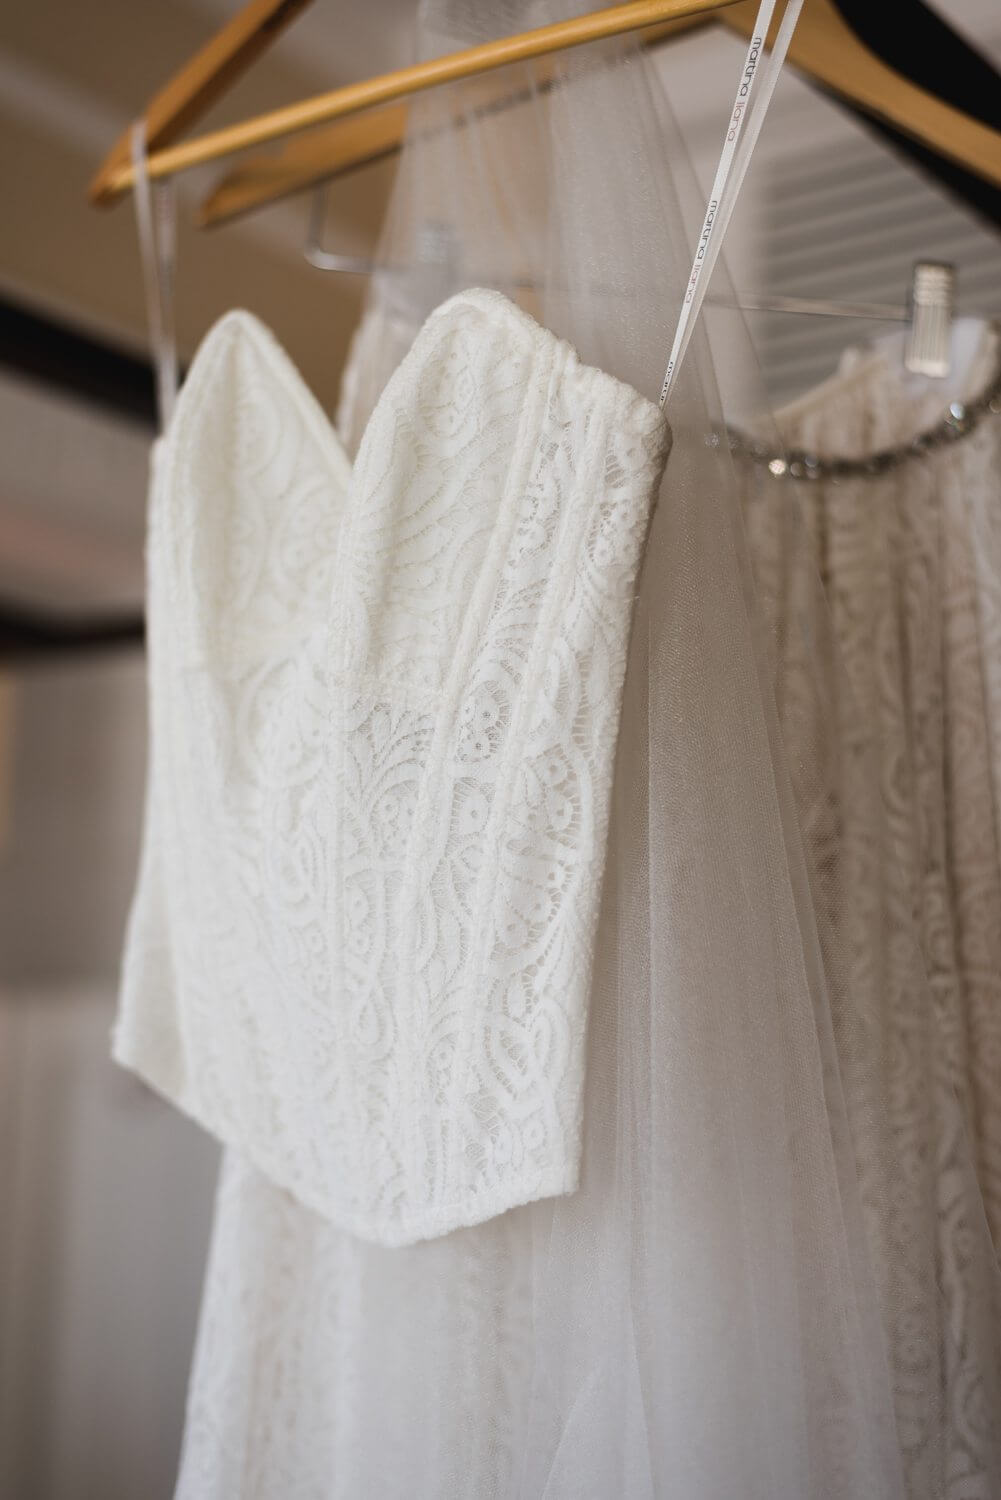 A white wedding dress hanging on a rack, perfect for a Key West wedding at the Southernmost Mansion.